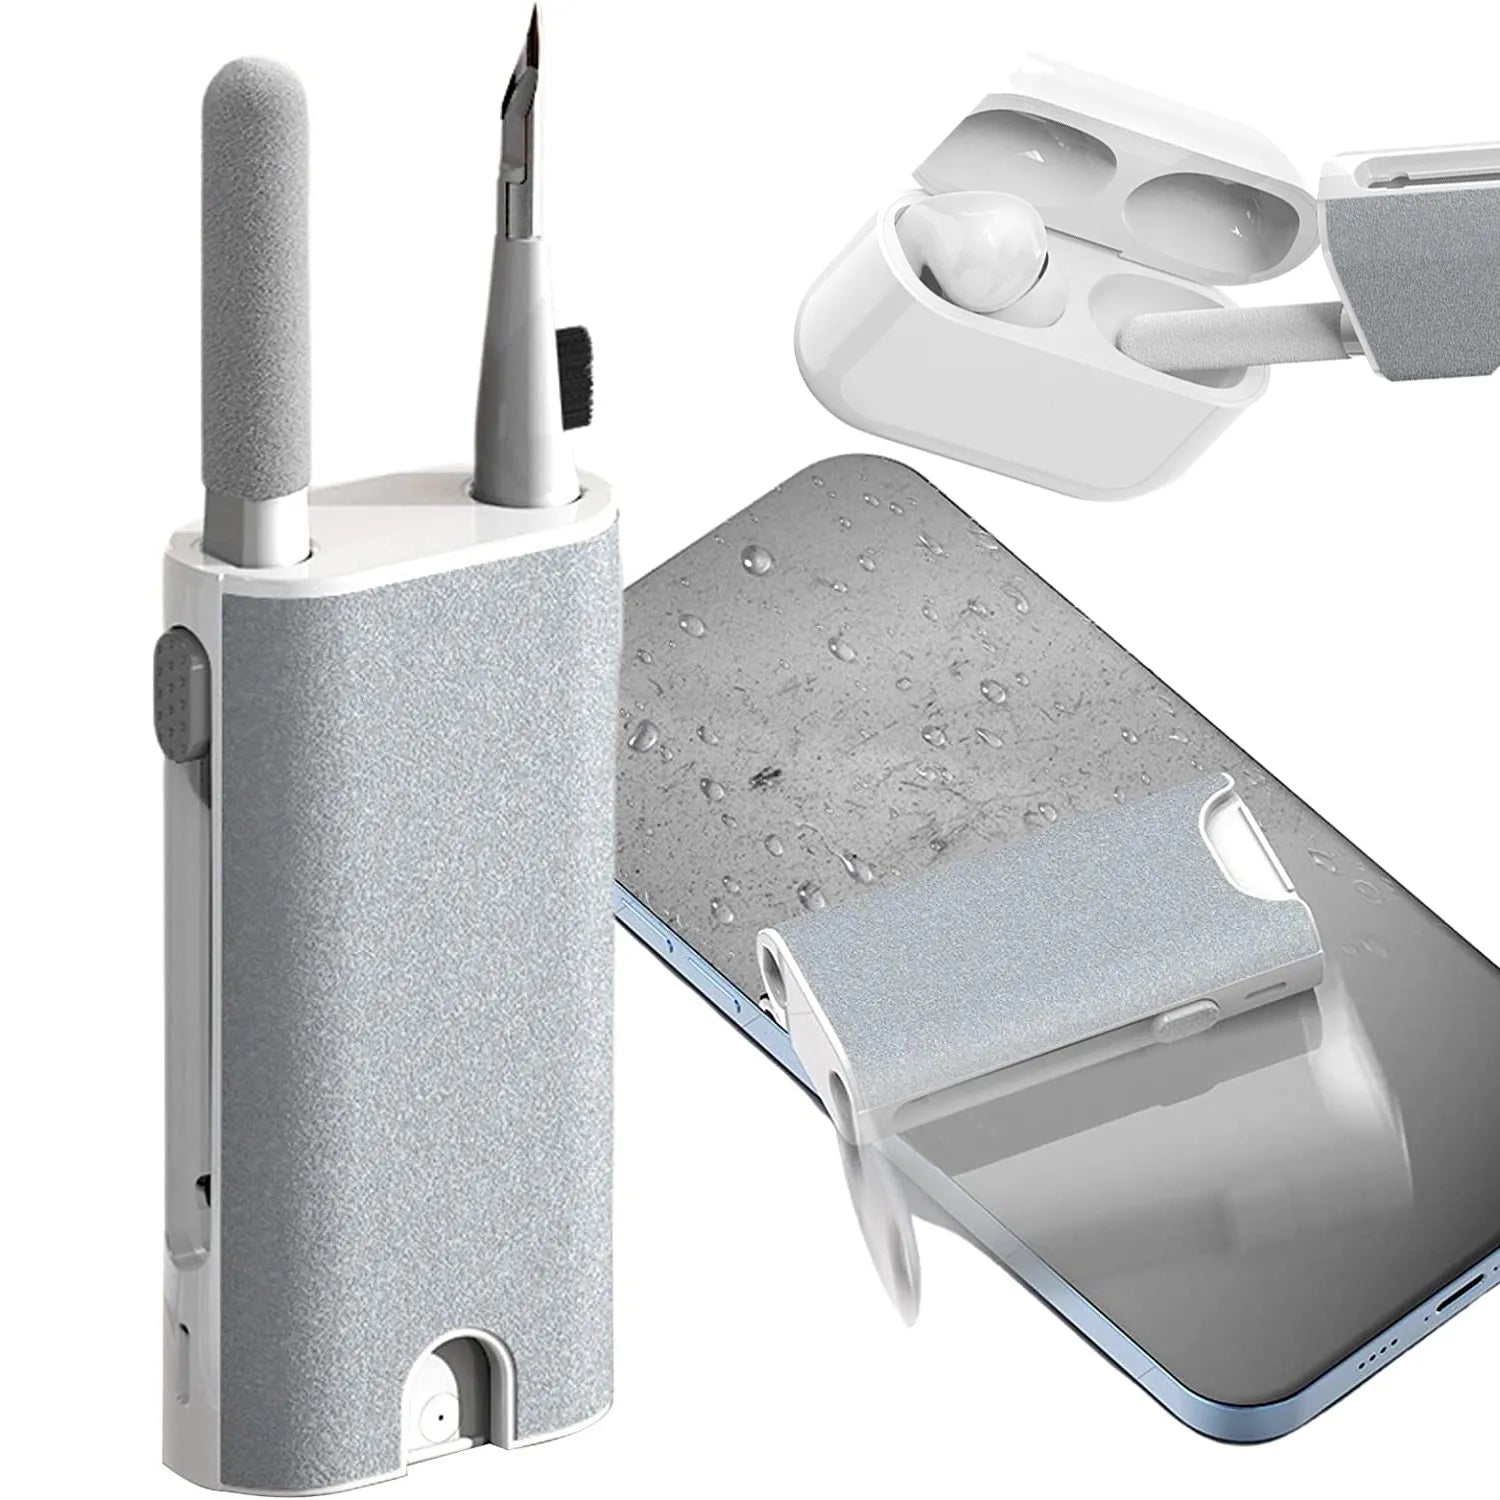 5-in-1 Device Cleaner Kit for Airpod Pro and Devices